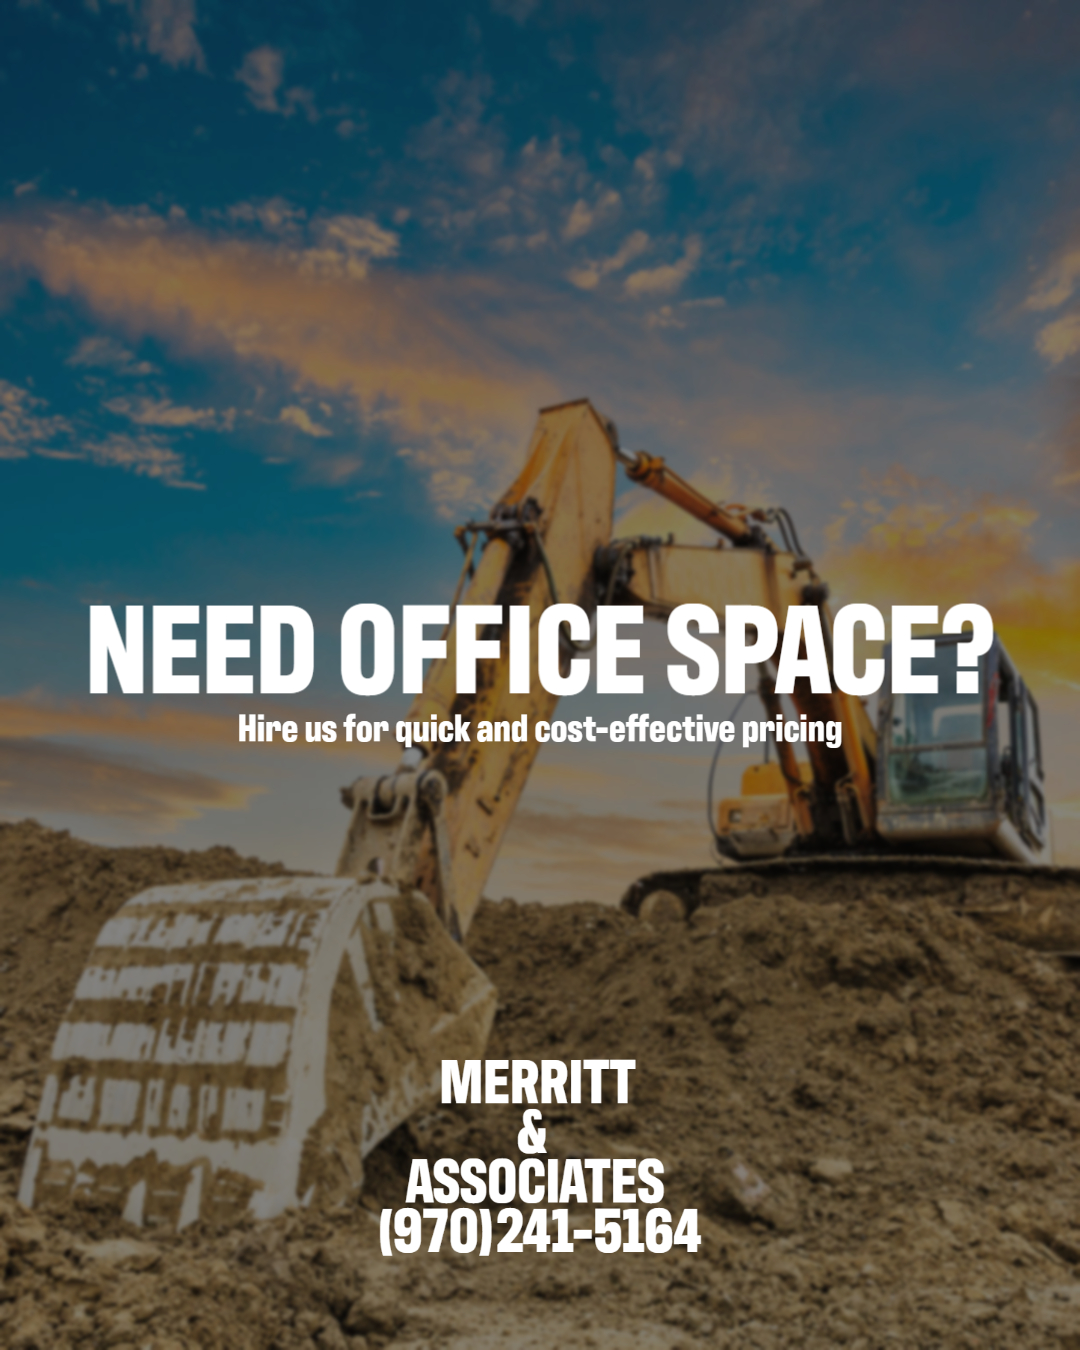 Need new office space?